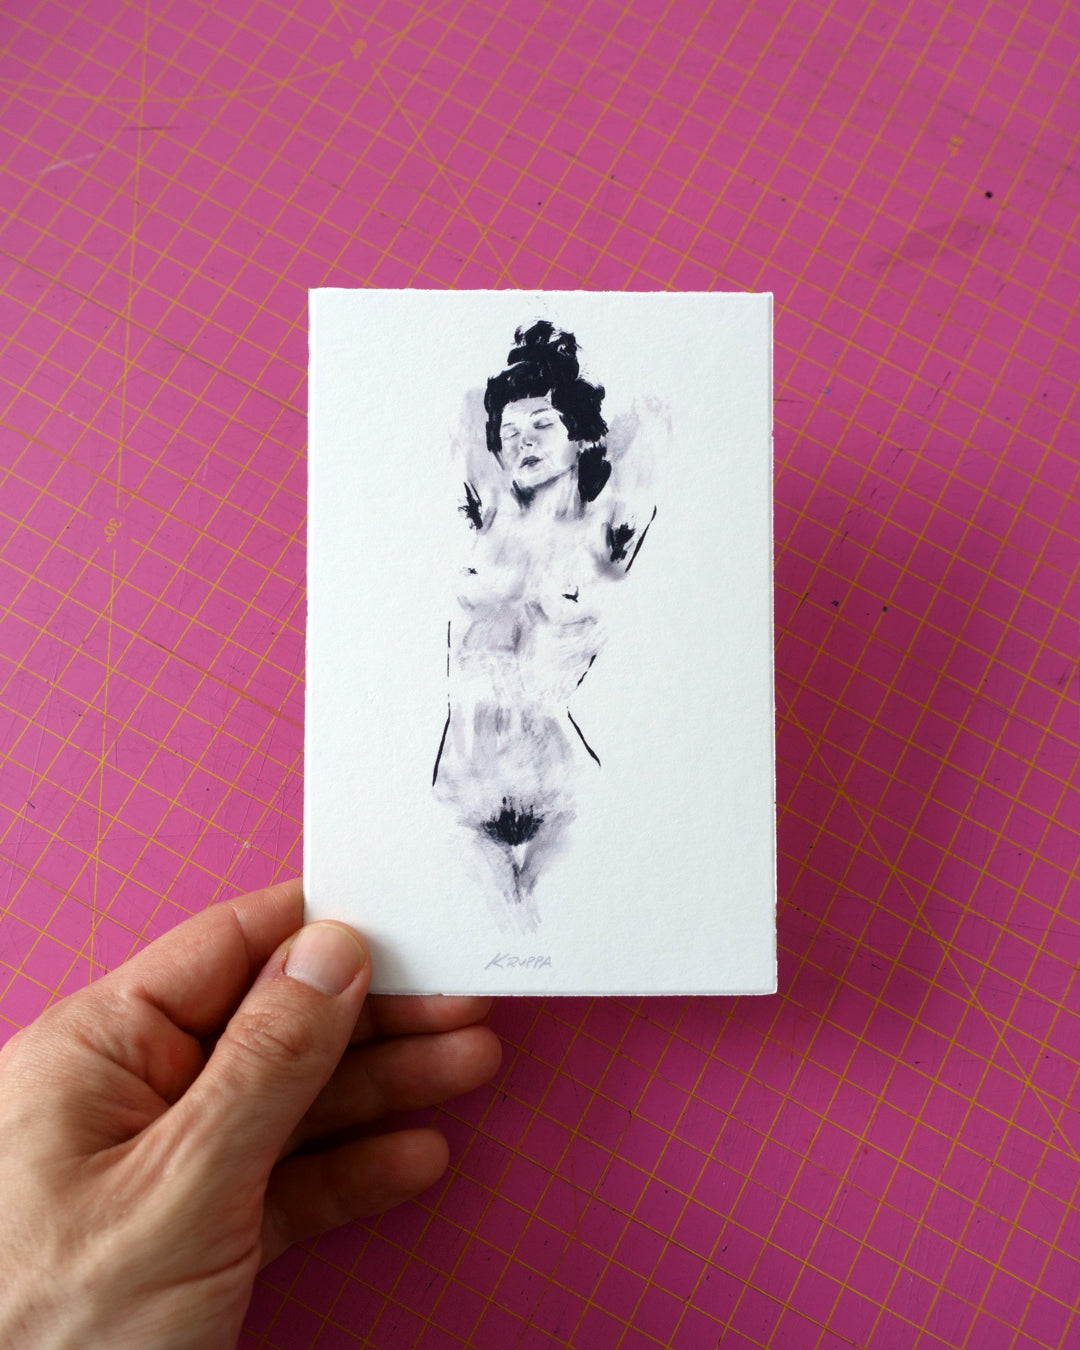 Monthly postcard subscription - handmade nude art postcards by Tobias Kruppa